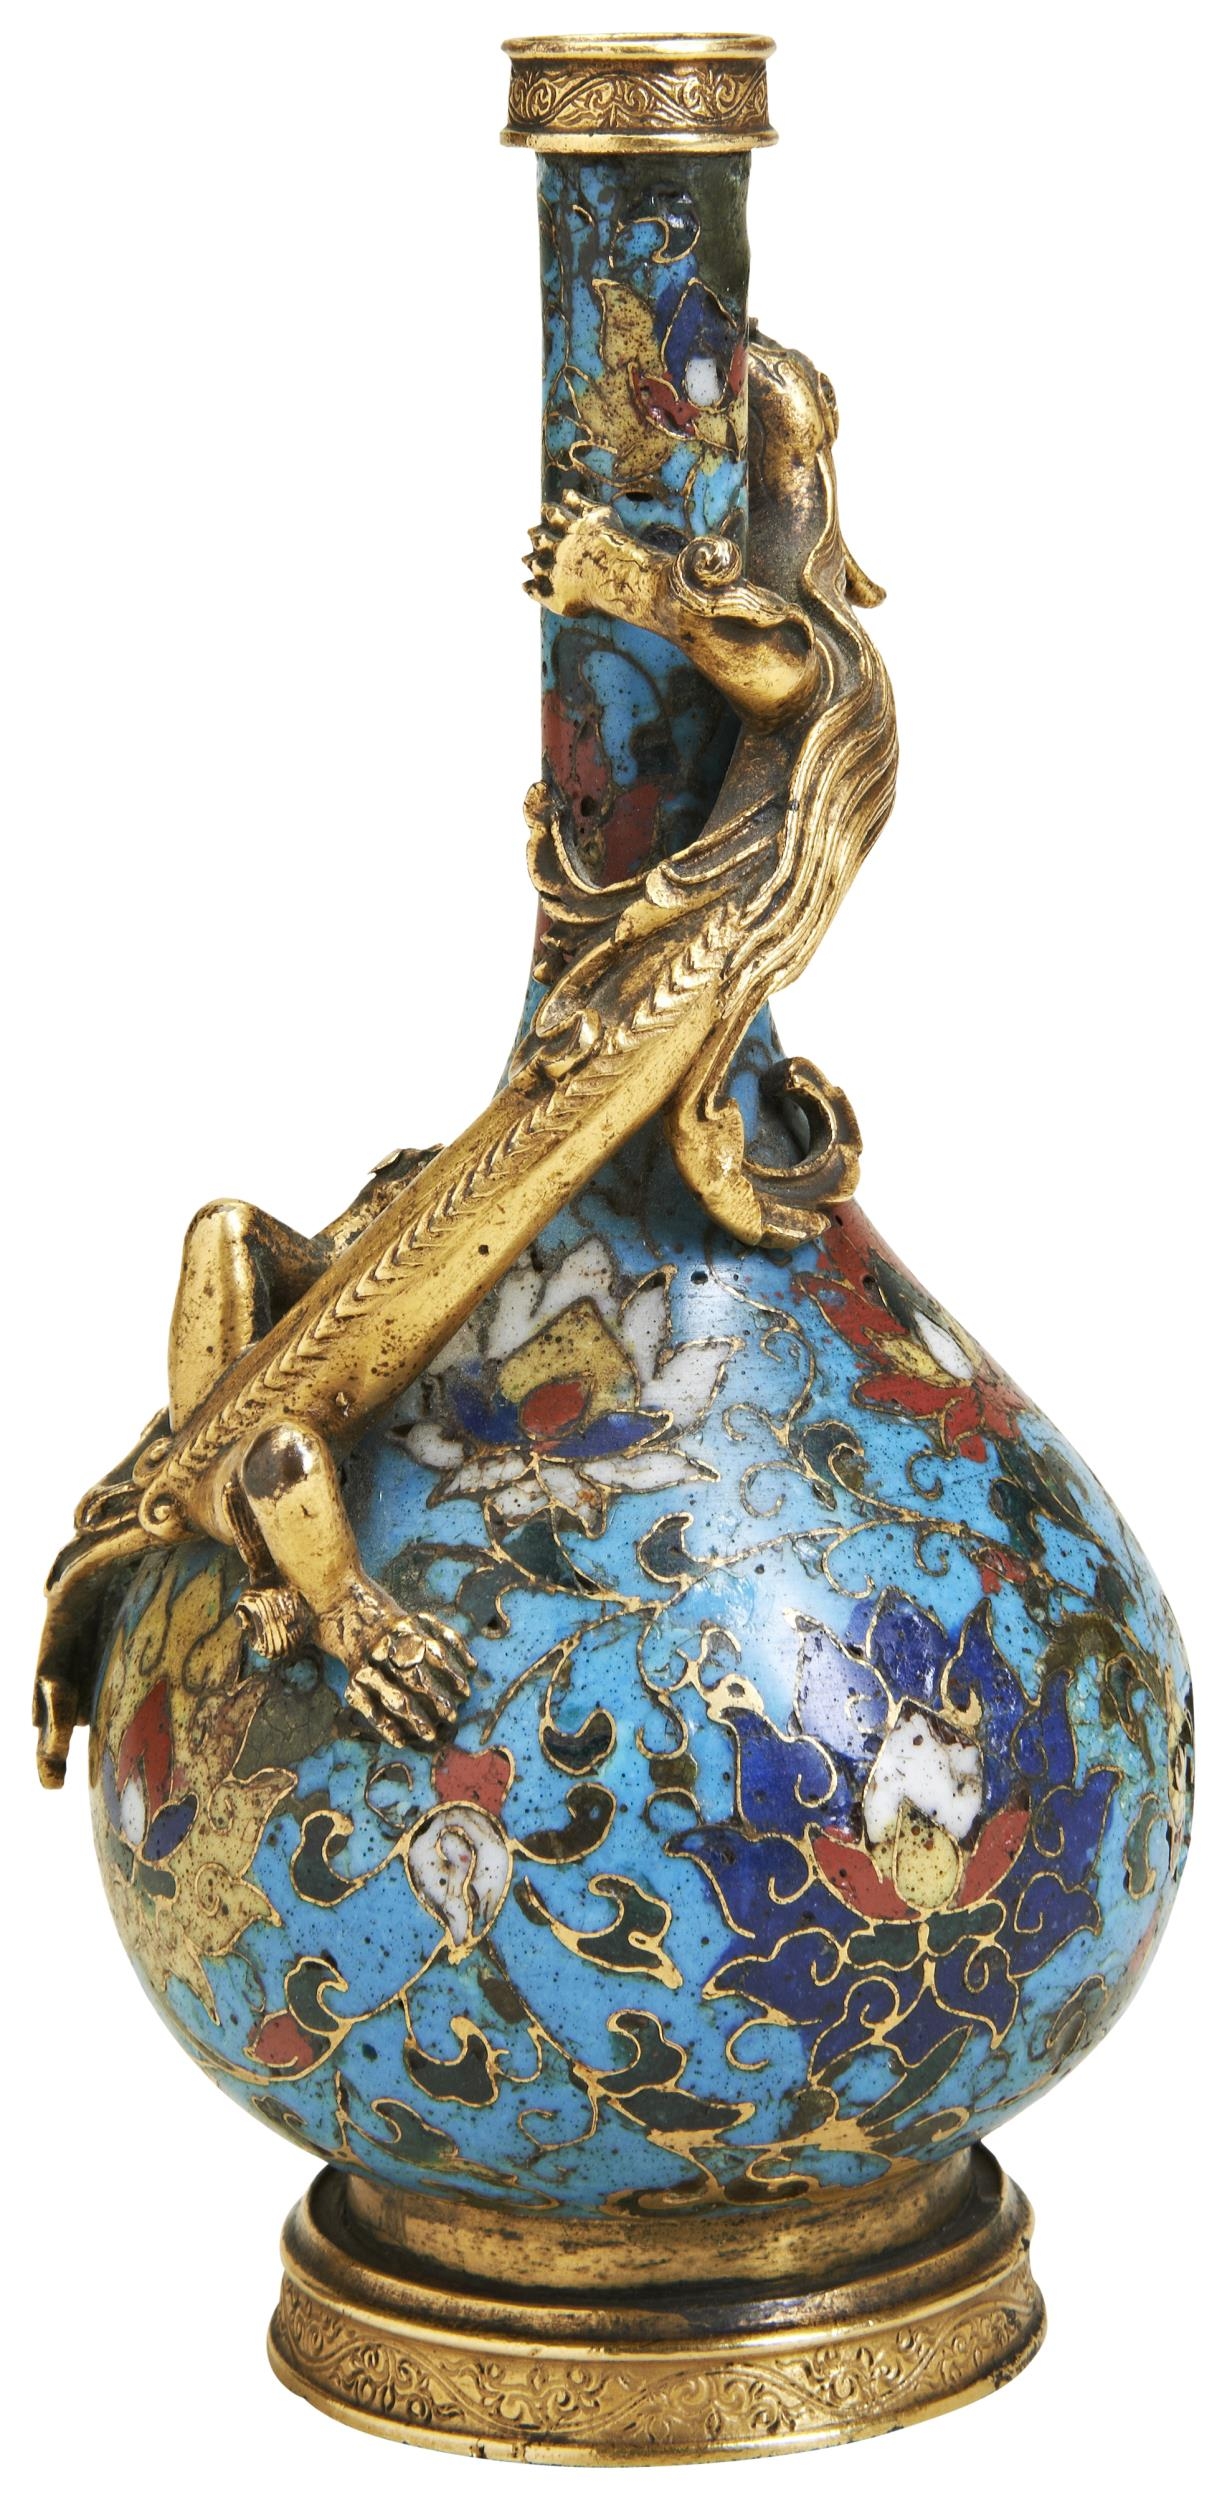 A FINE AND RARE CLOISONNE ENAMEL 'LOTUS' BOTTLE VASE INCISED JINGTAI SIX CHARACTER MARK, MID MING - Image 4 of 6